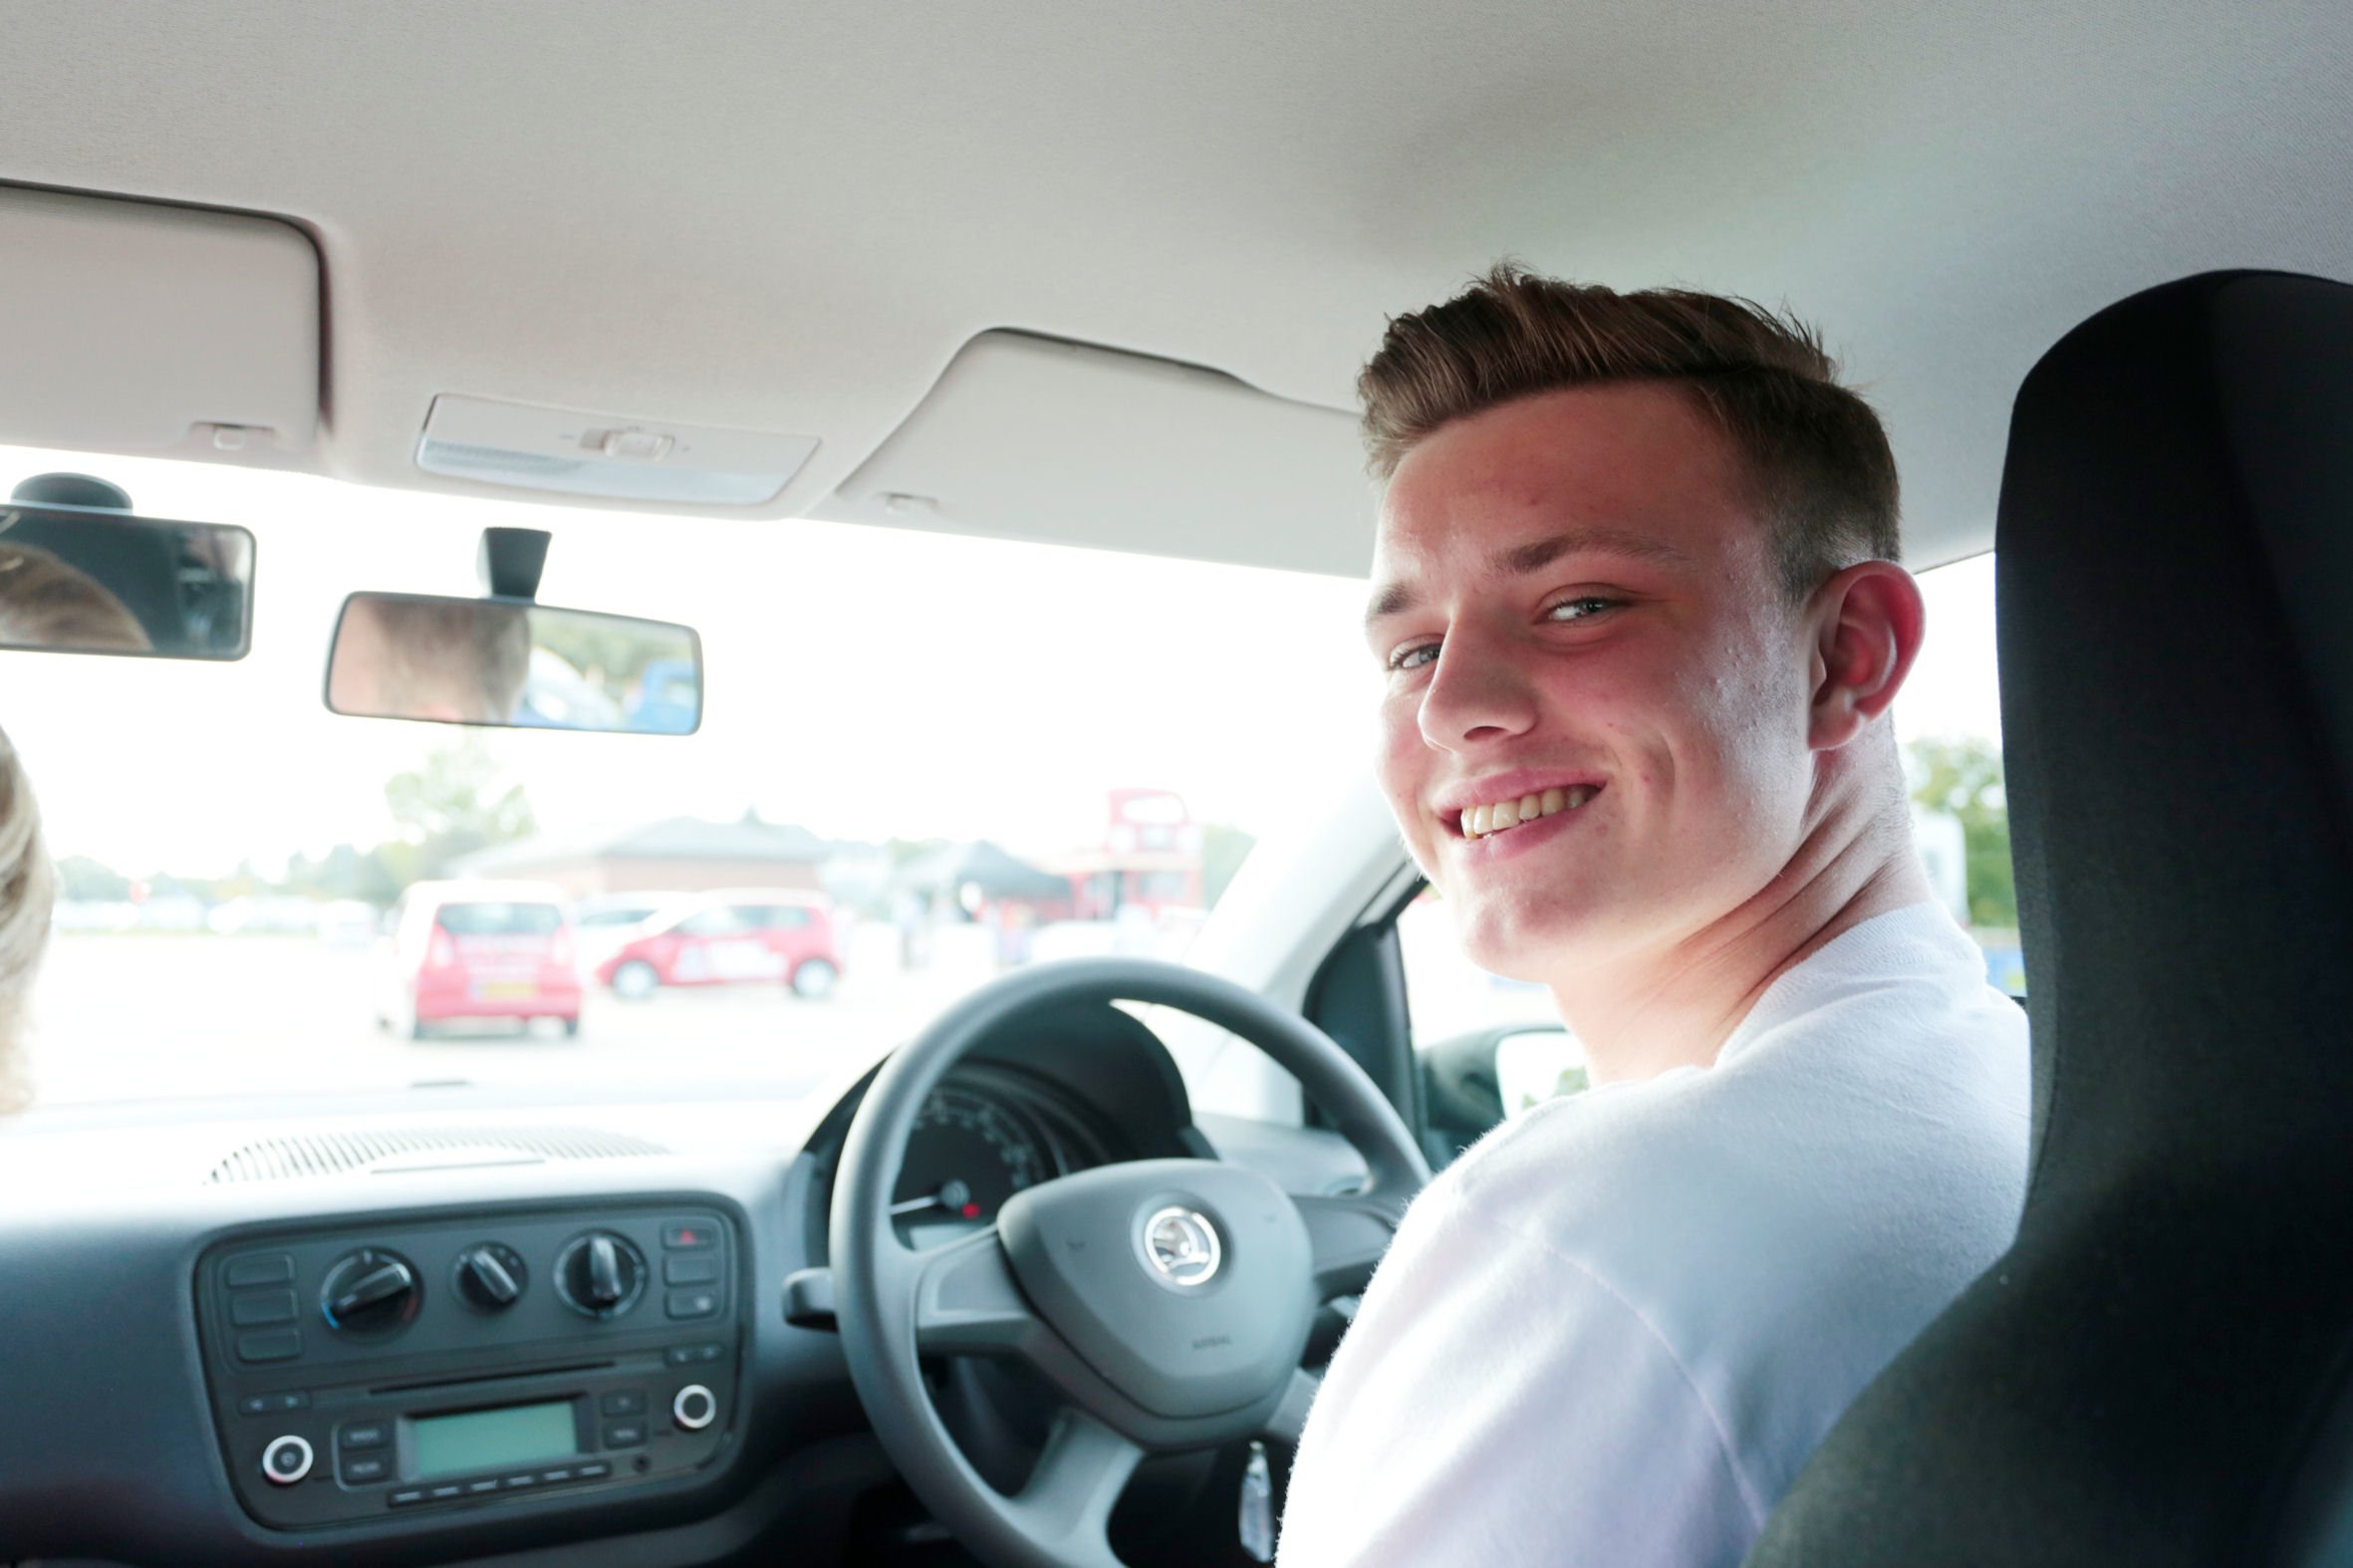 Newly qualified drivers can face all kinds of challenges when trying to stay safe on the road